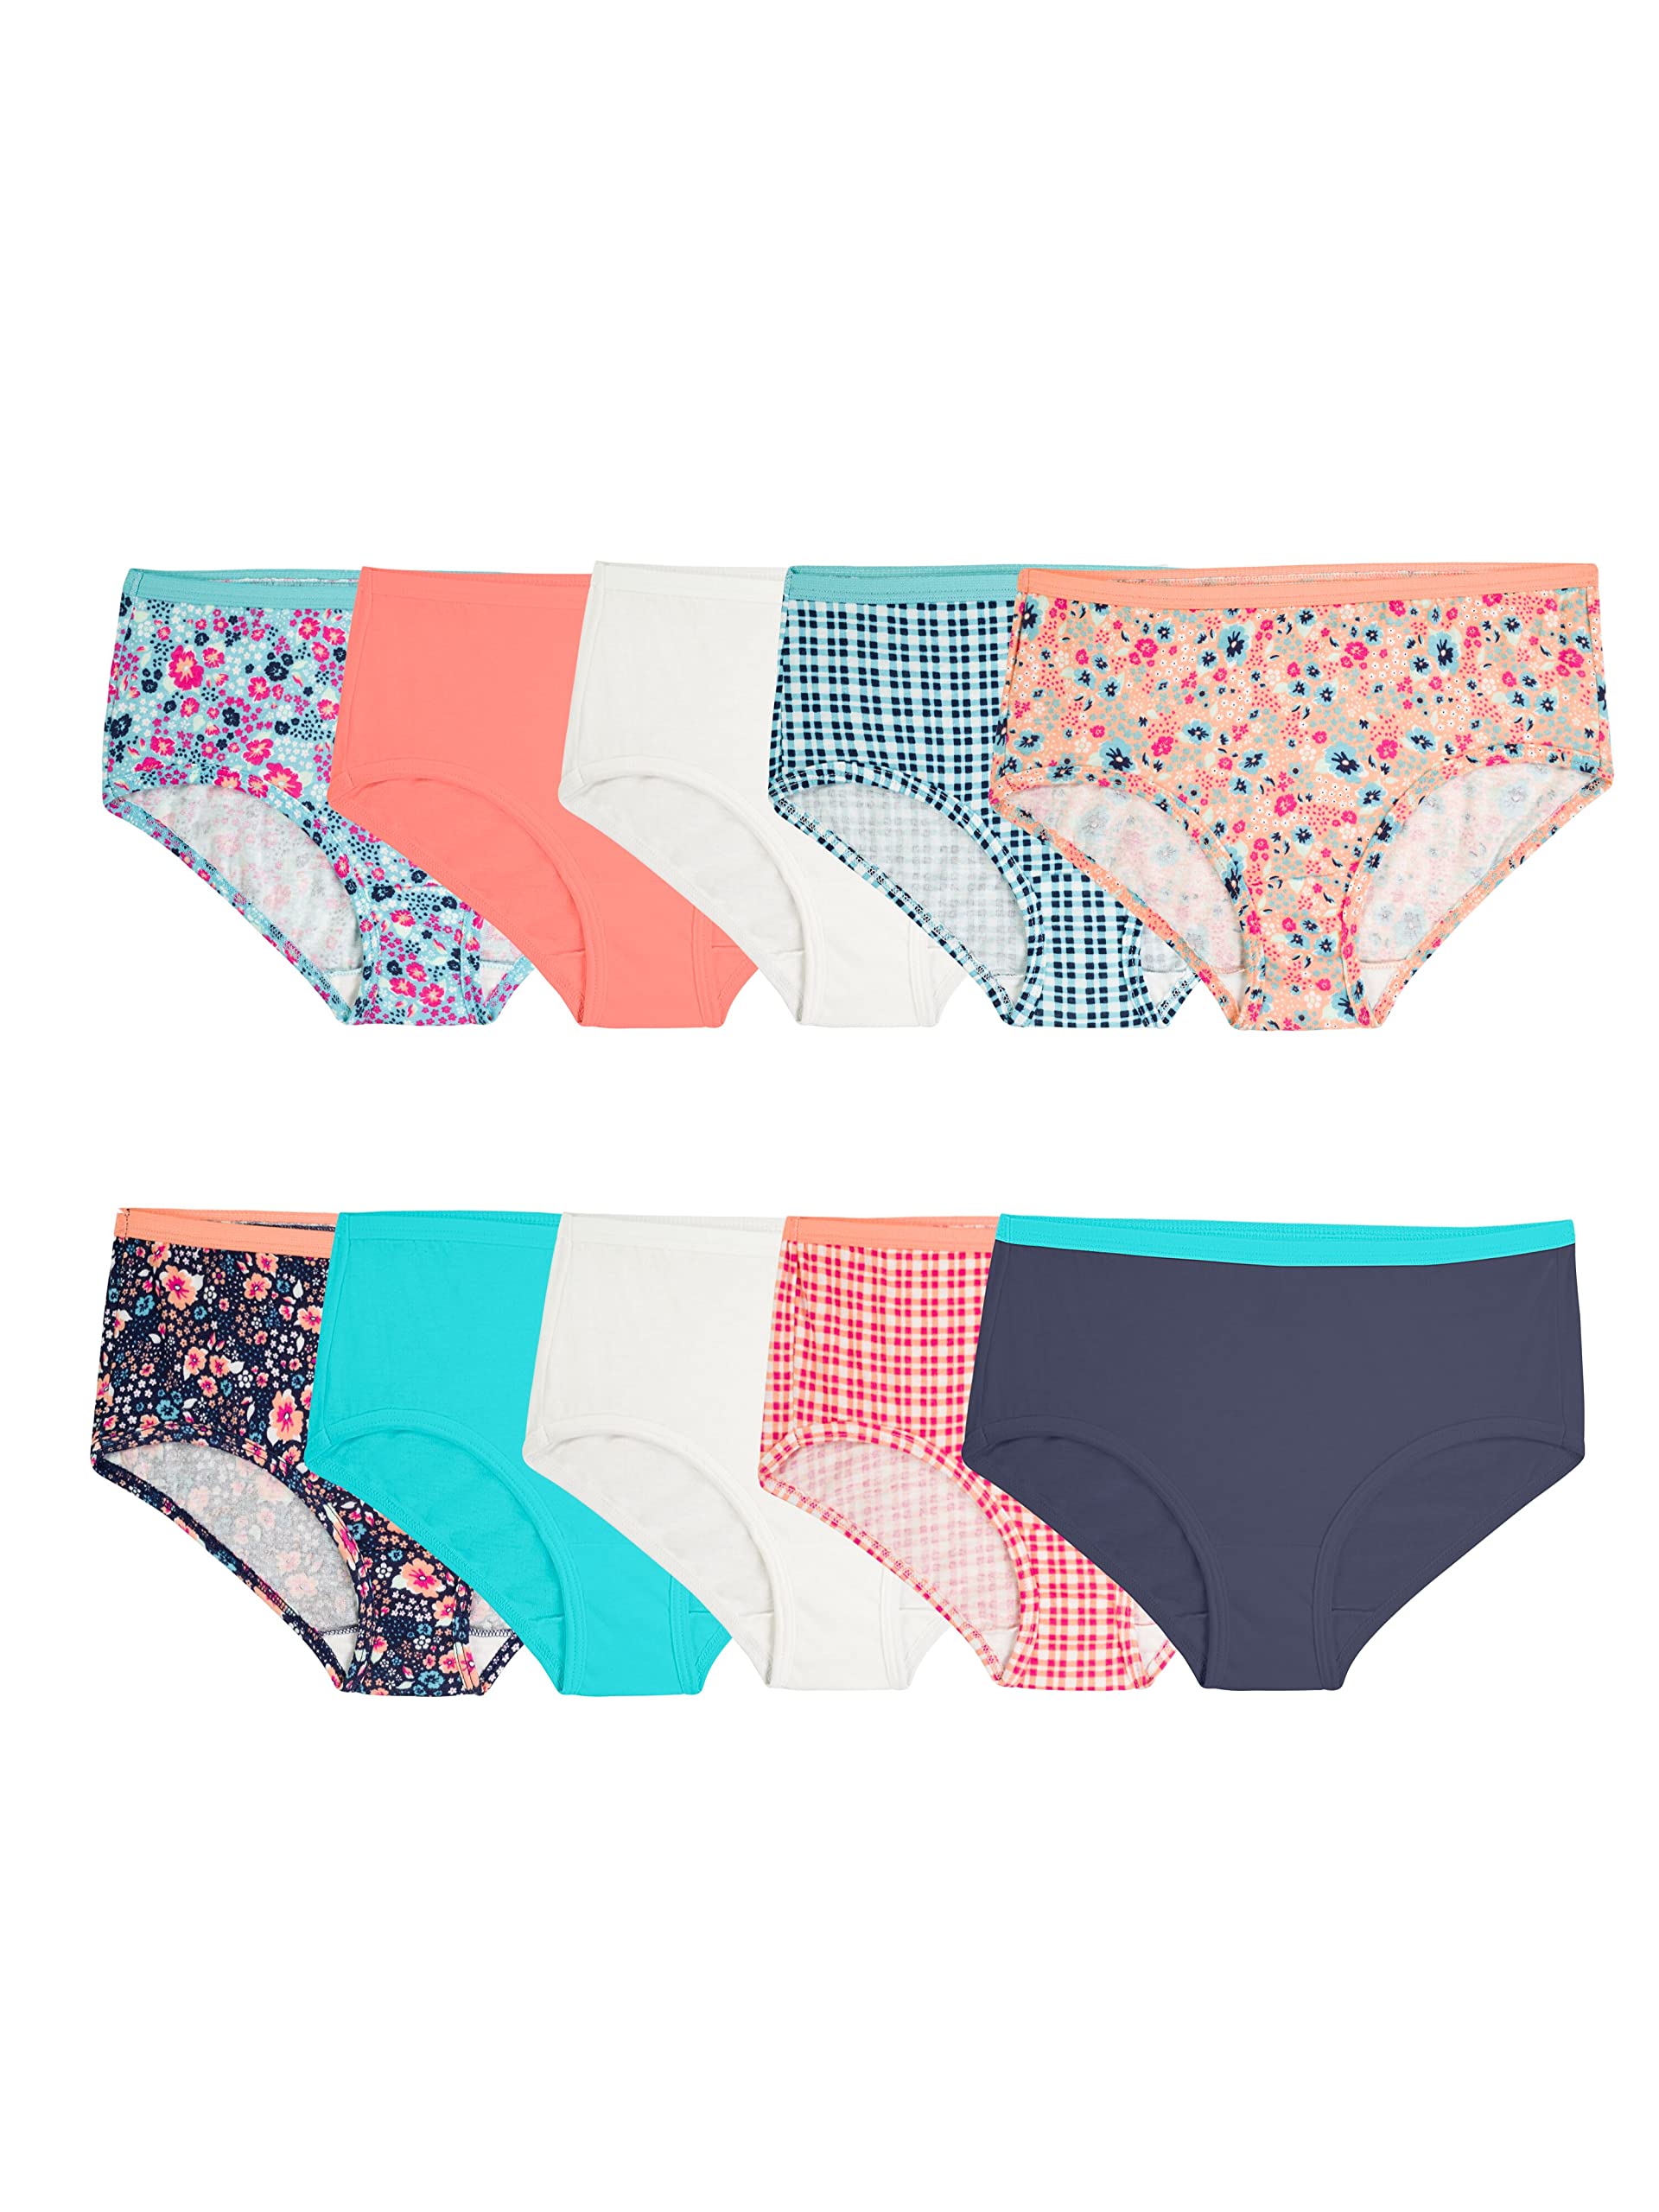 Fruit of the Loom Girls' Tag Free Cotton Brief Underwear Multipacks